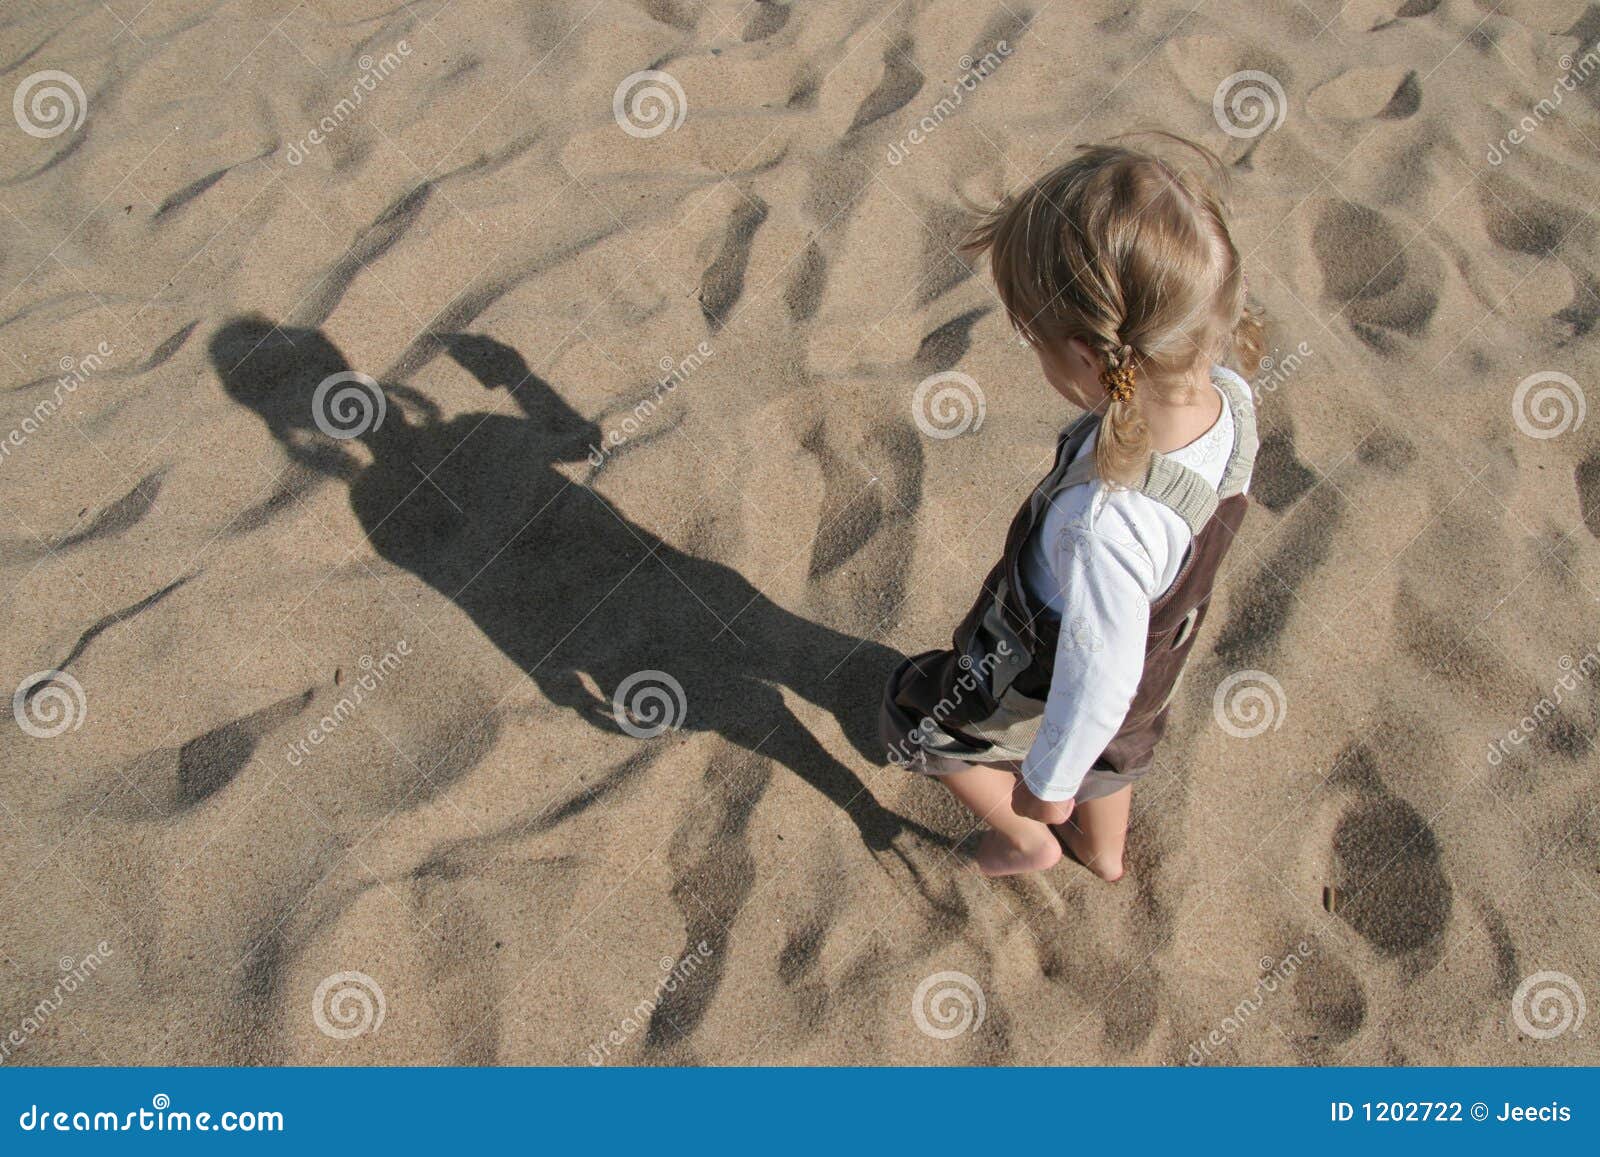 child and shadow